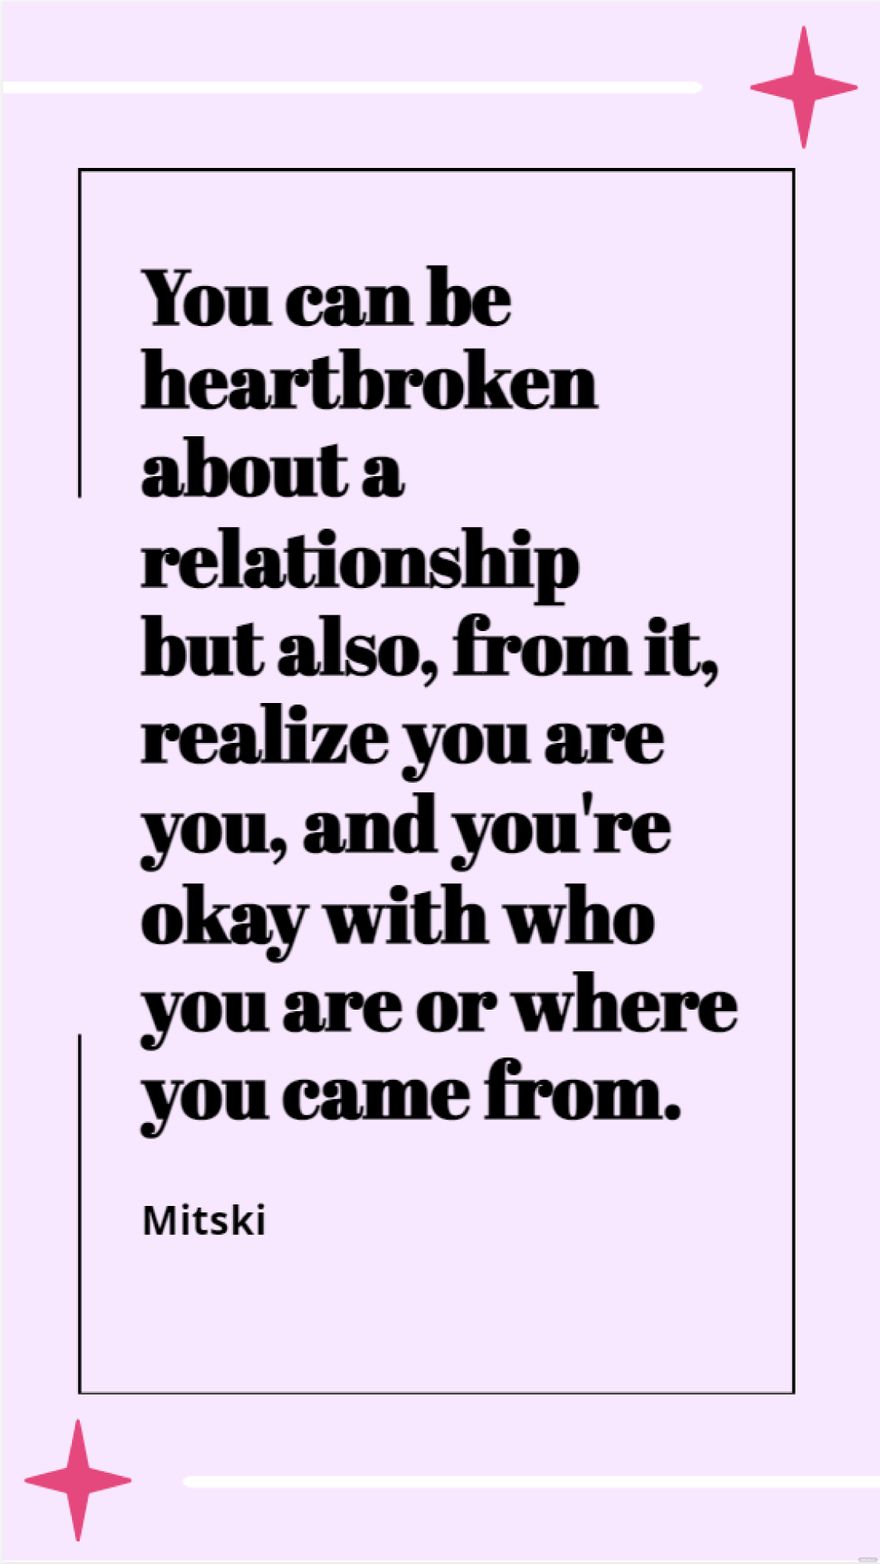 Mitski - You can be heartbroken about a relationship but also, from it, realize you are you, and you're okay with who you are or where you came from.